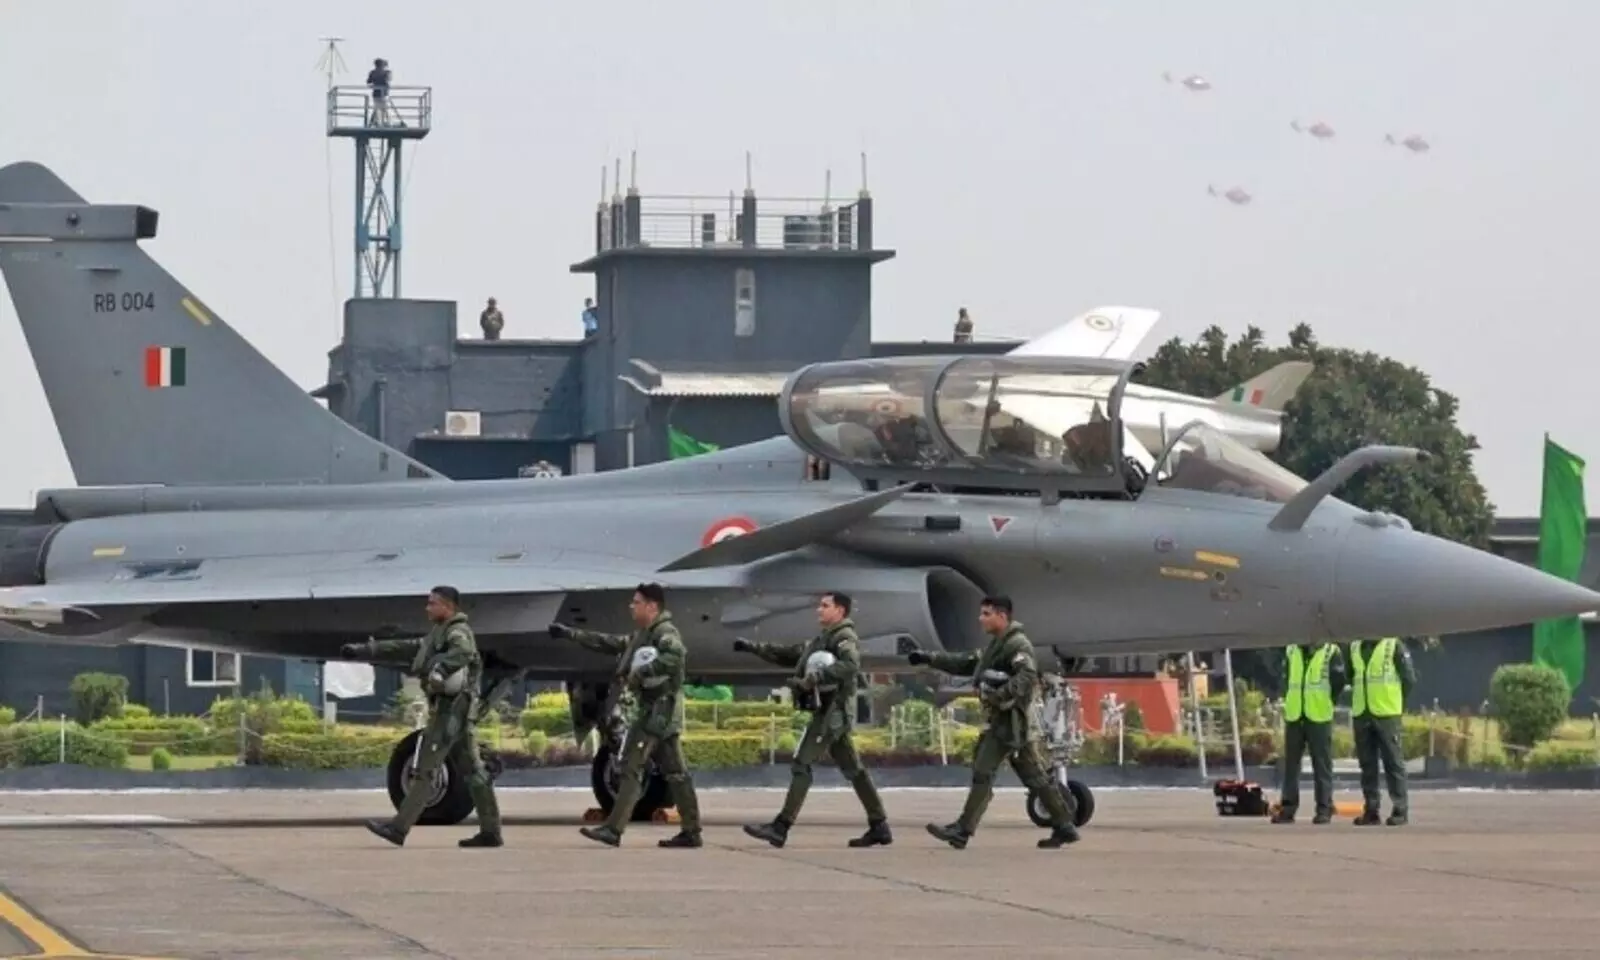 Flying non stop from France,2nd batch of Rafale Aircrafts arrived in Gujarat